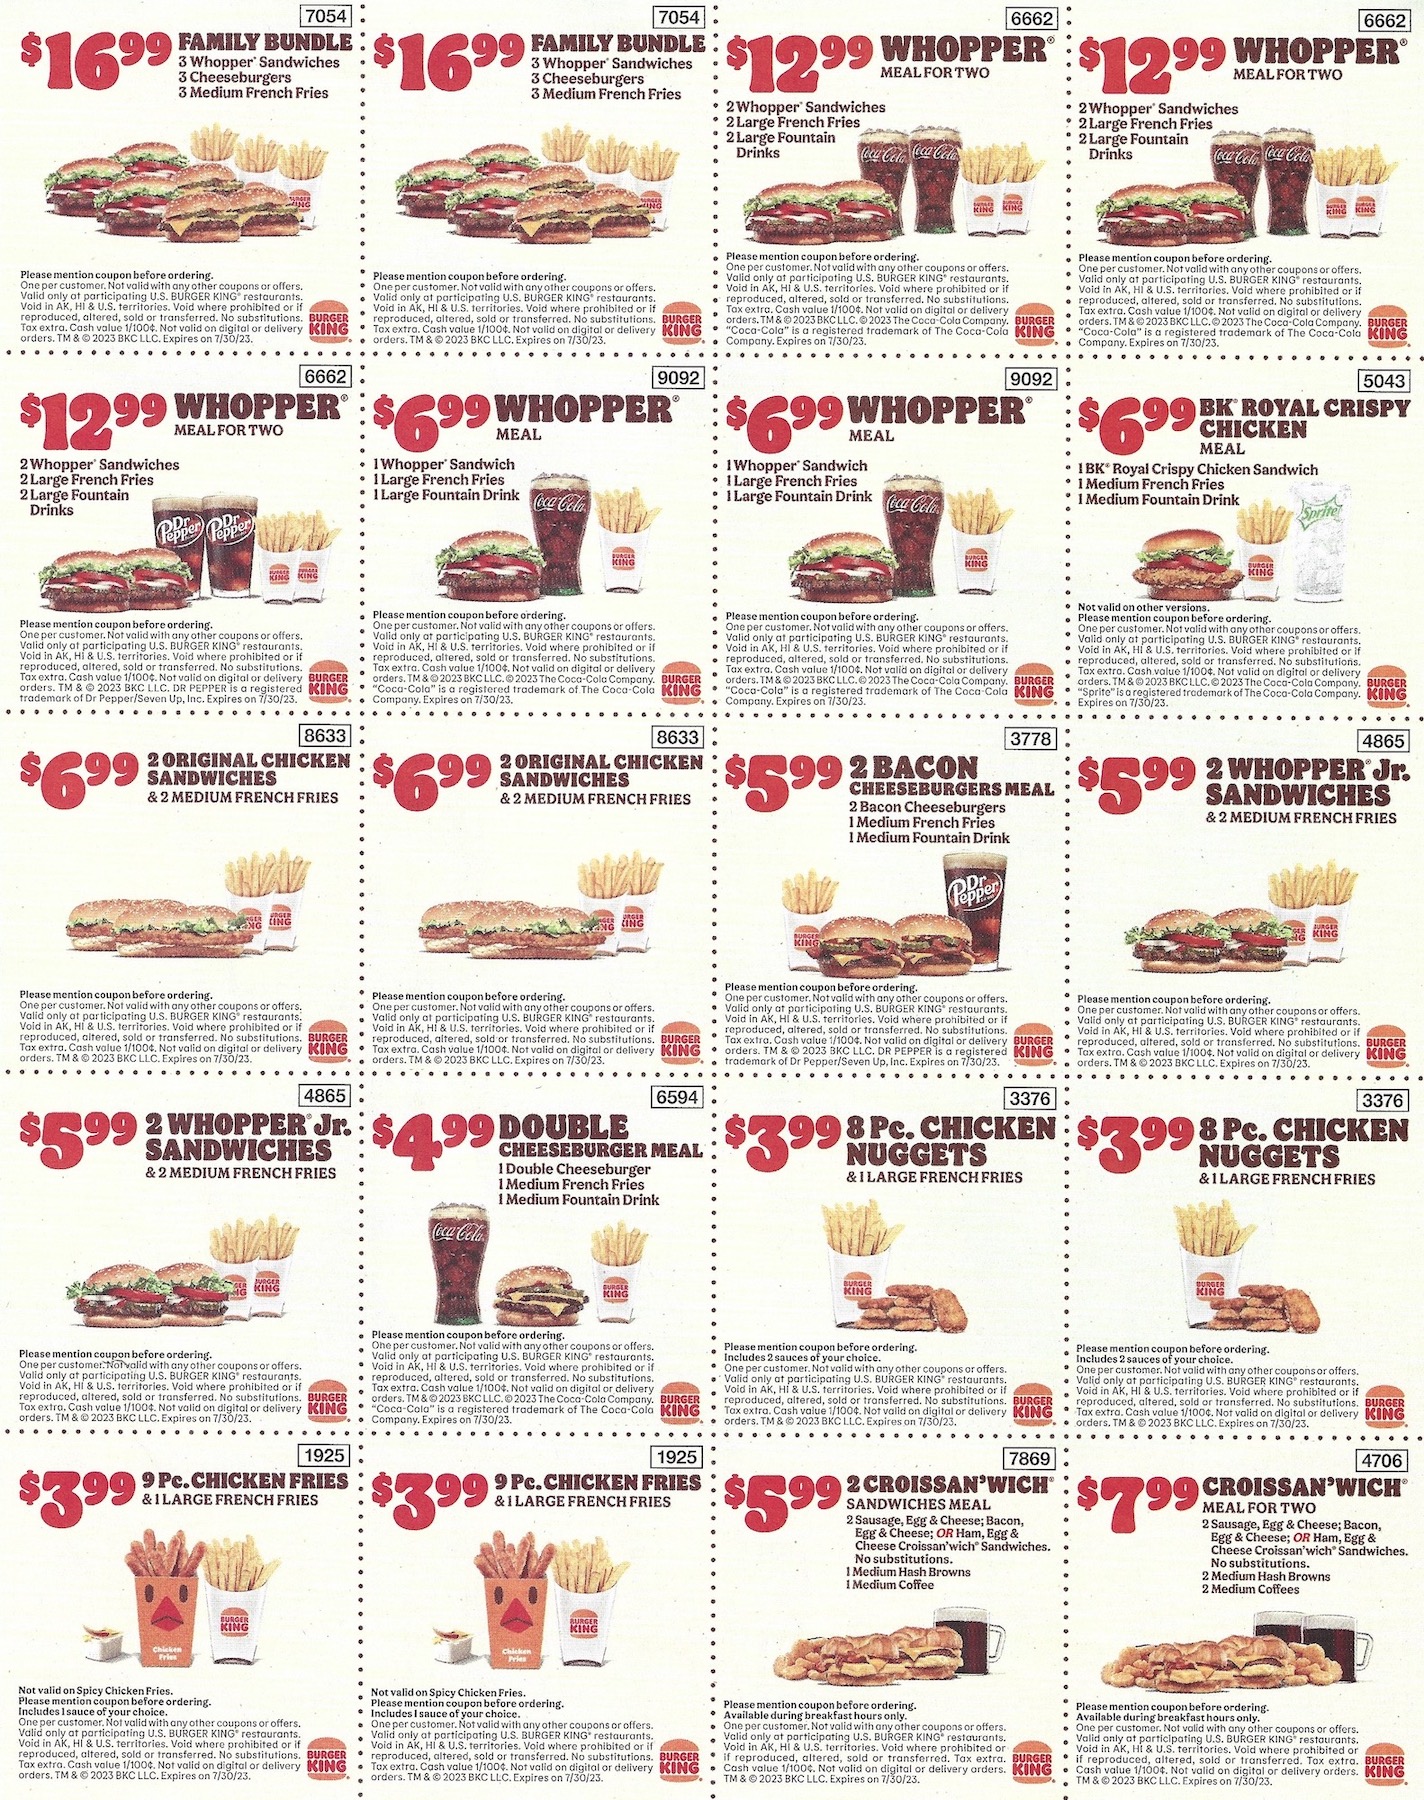 burger-king-printable-coupons-spider-verse-whopper-expires-07-30-2023